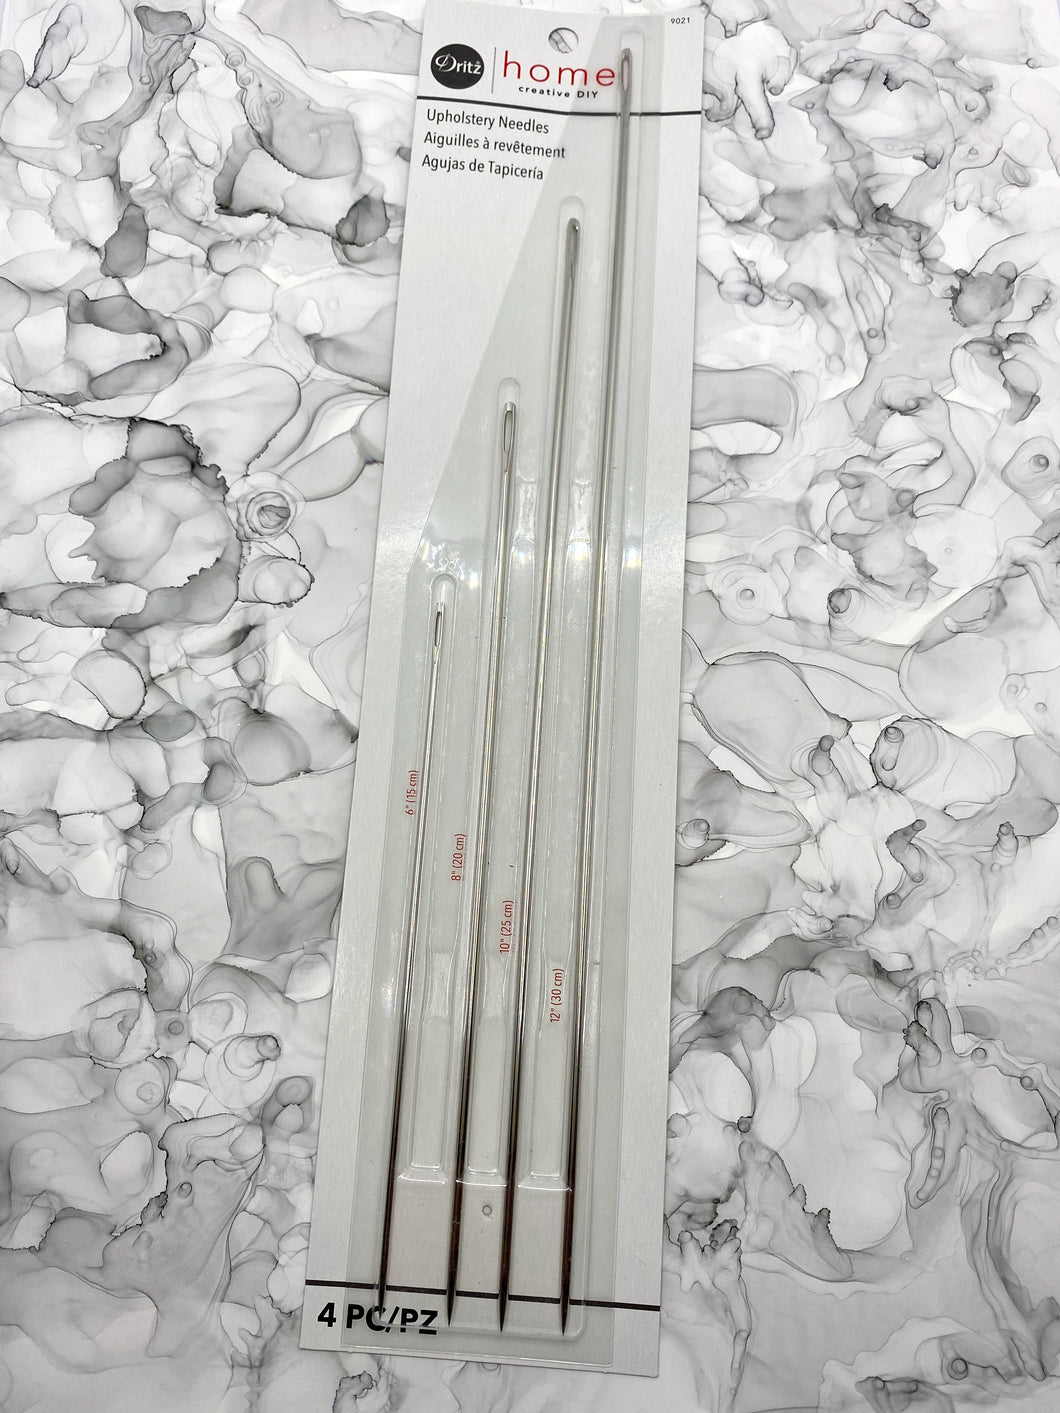 Upholstery Needles by Dritz